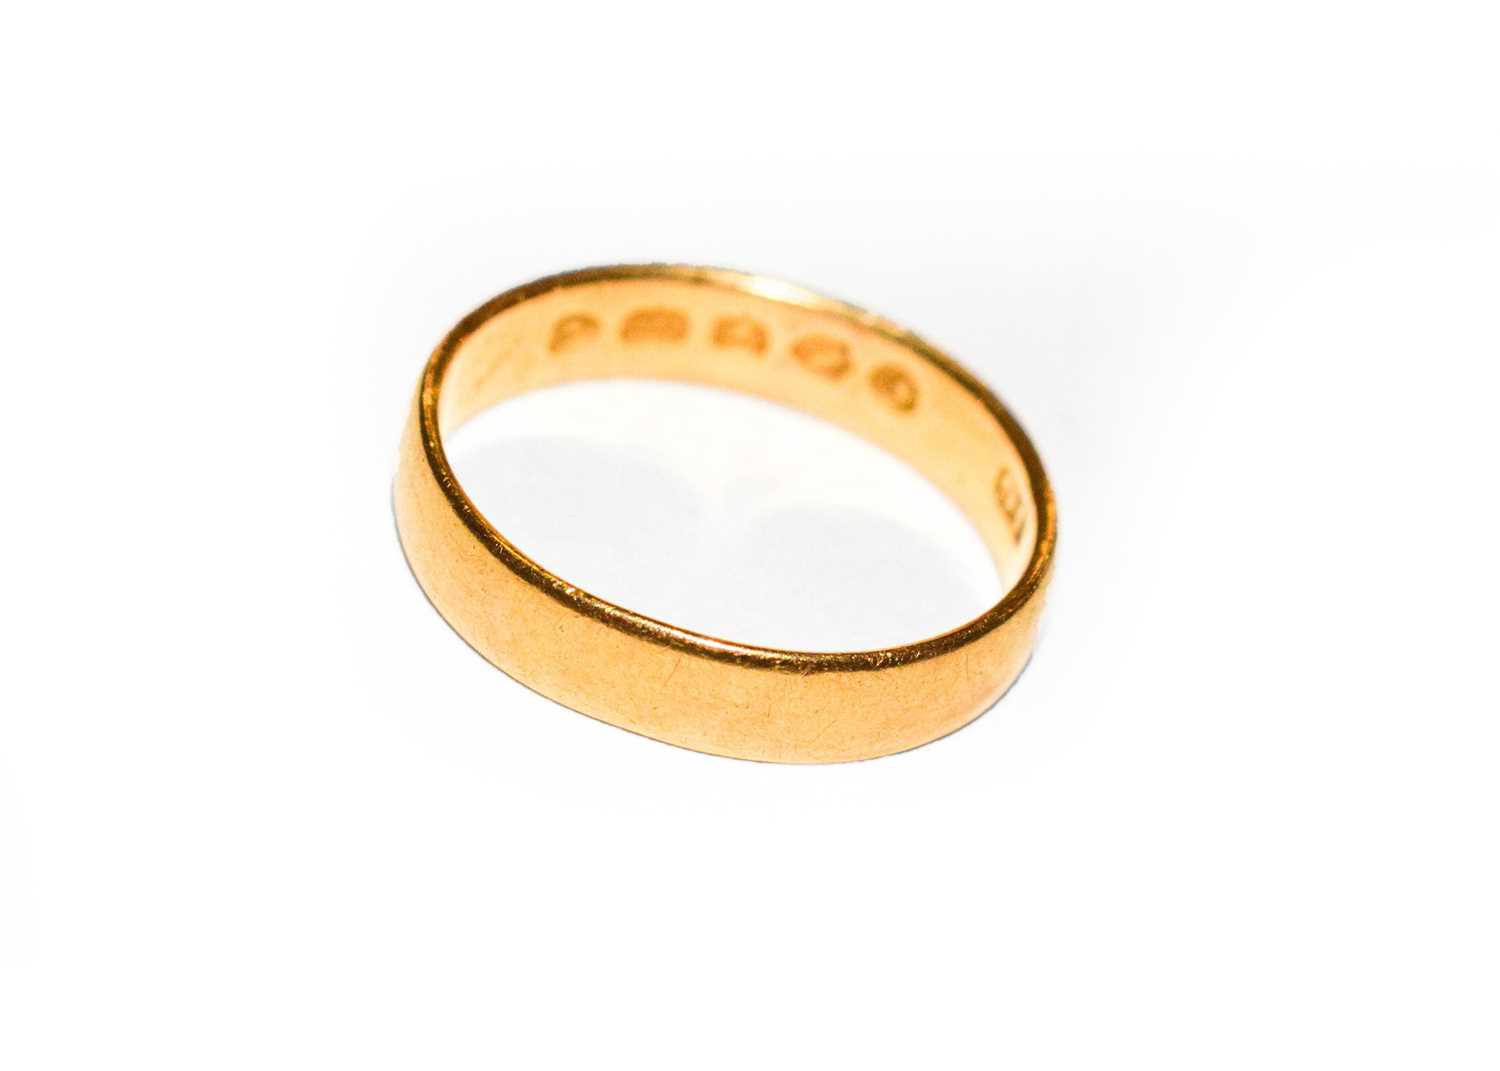 Lot 172 - A 22 carat gold band ring, out of shape